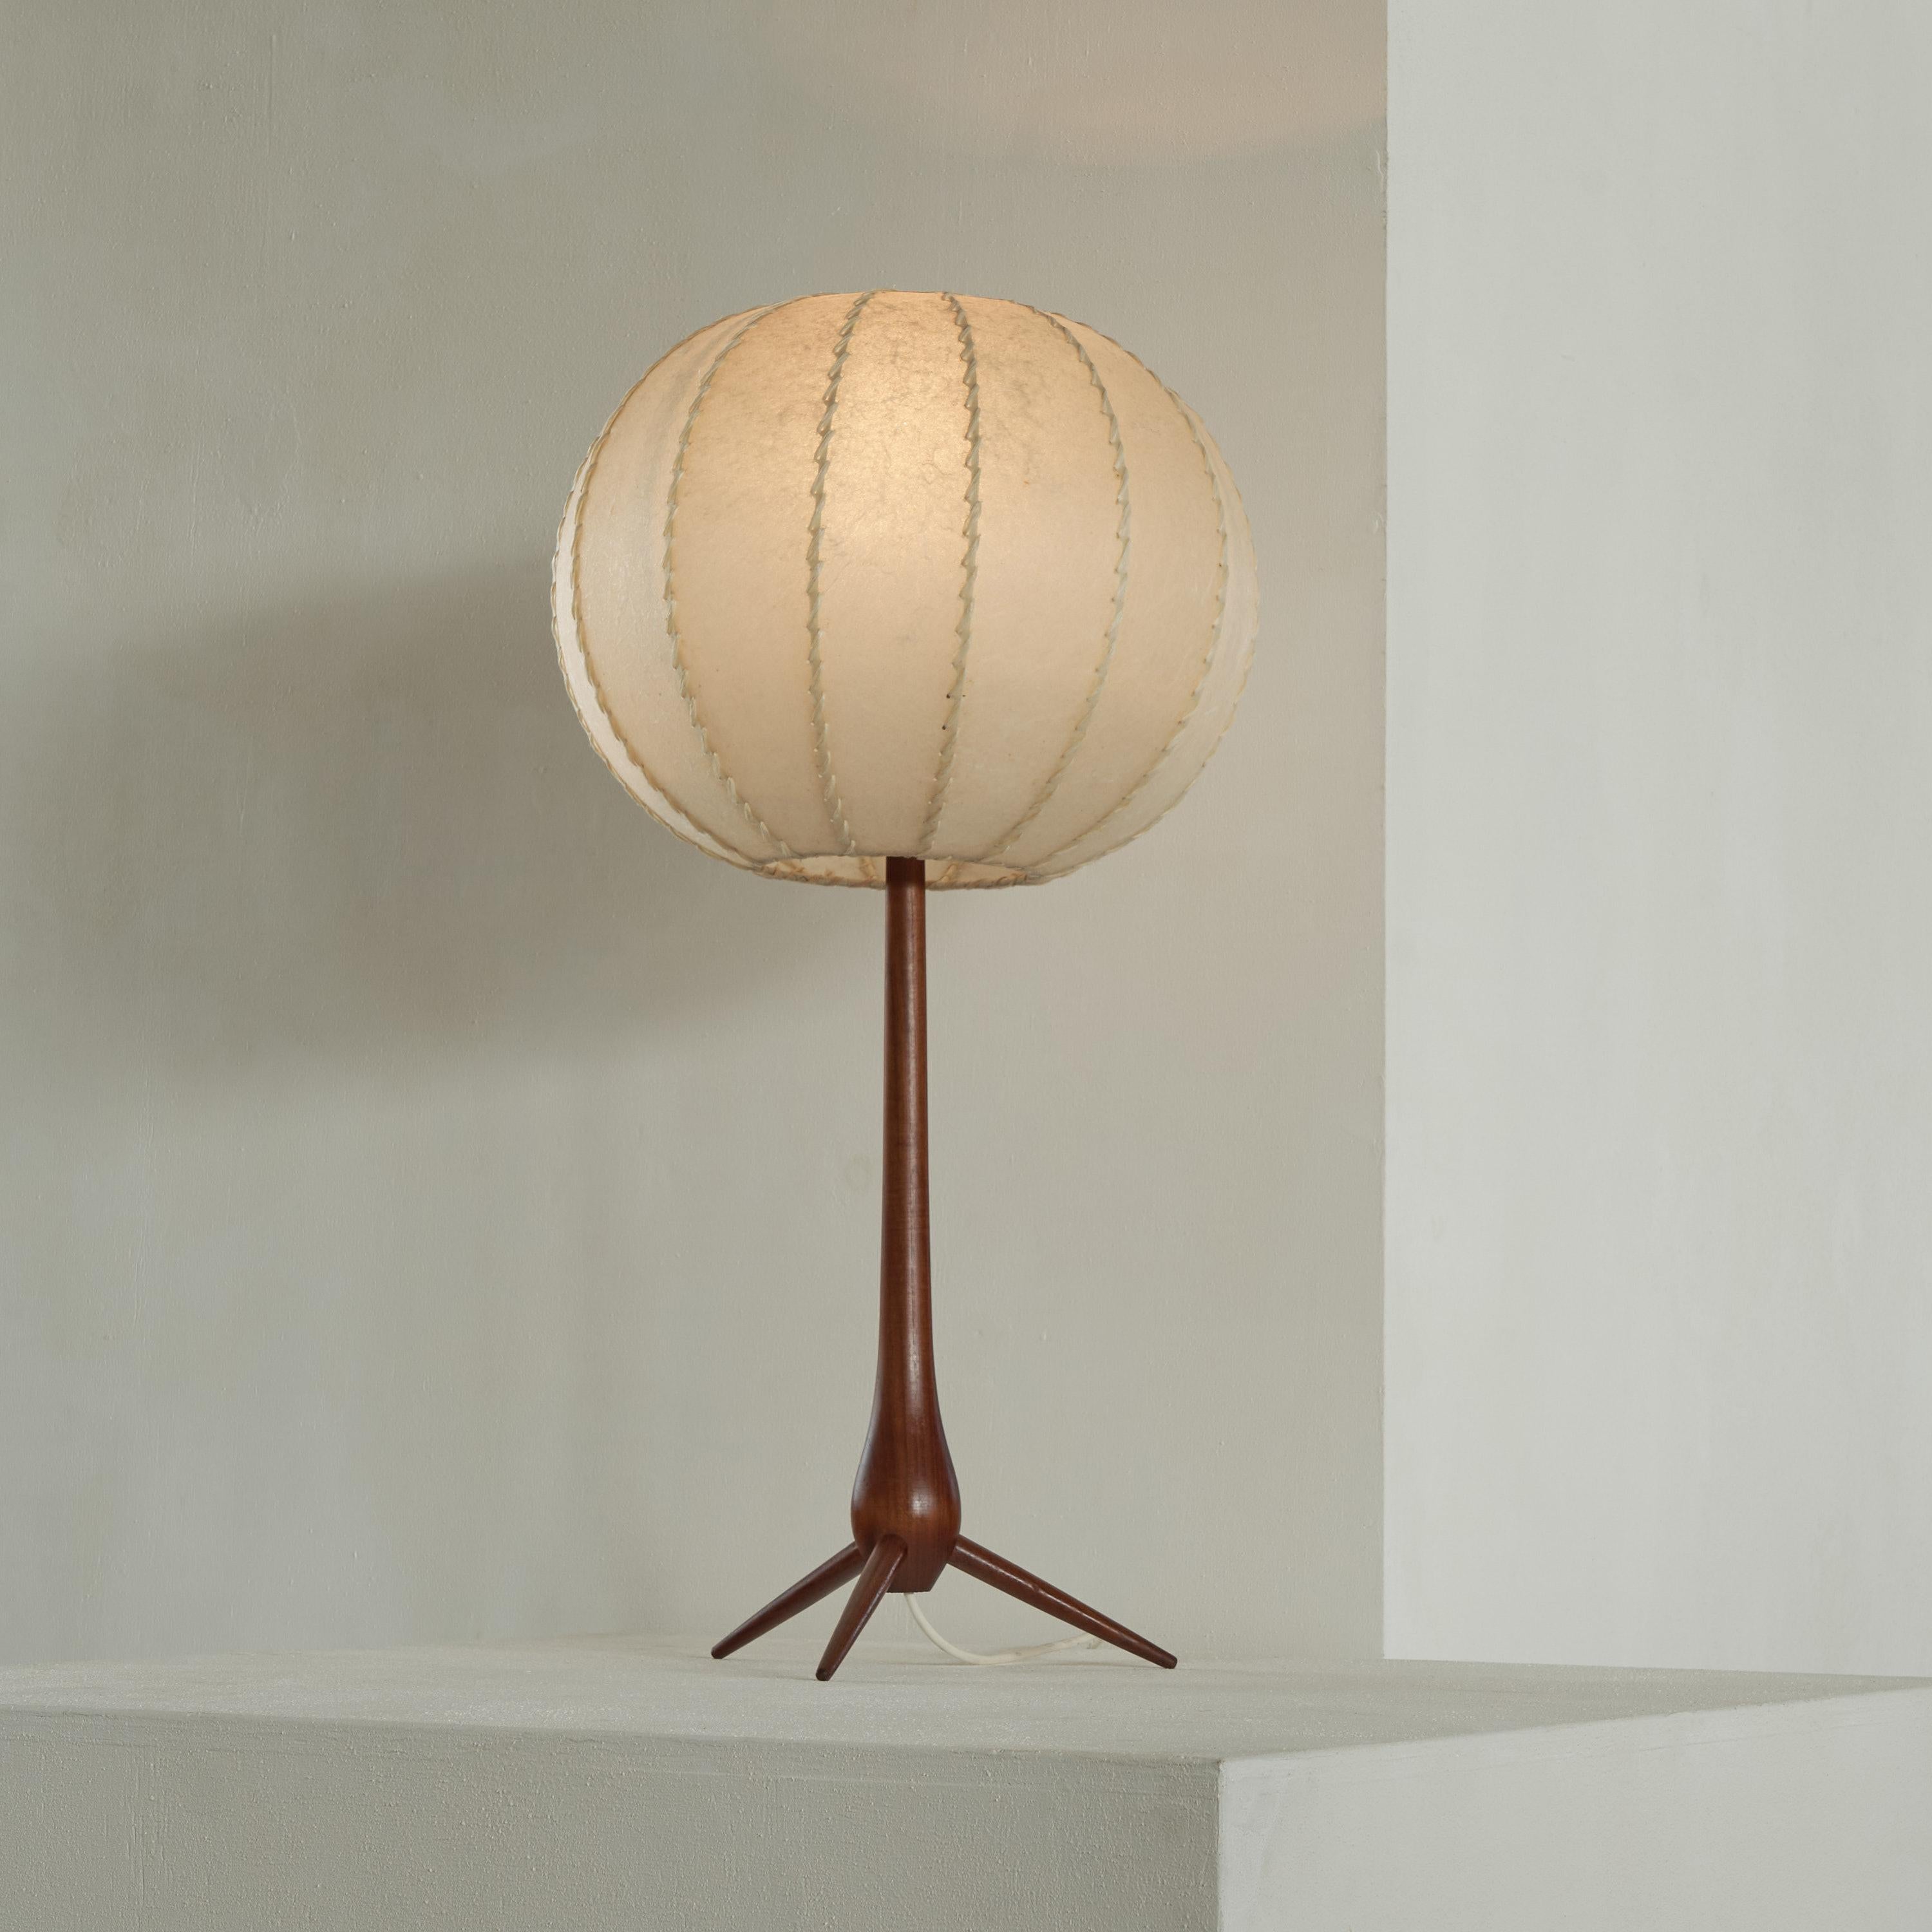 Tripod floor lamp in teak and parchment. Denmark, 1960s.

Characteristic floor or table lamp from Denmark, made in solid teak and parchment. The tripod base has tapered legs that are connected to a teardrop-shaped solid teak vertical element. It